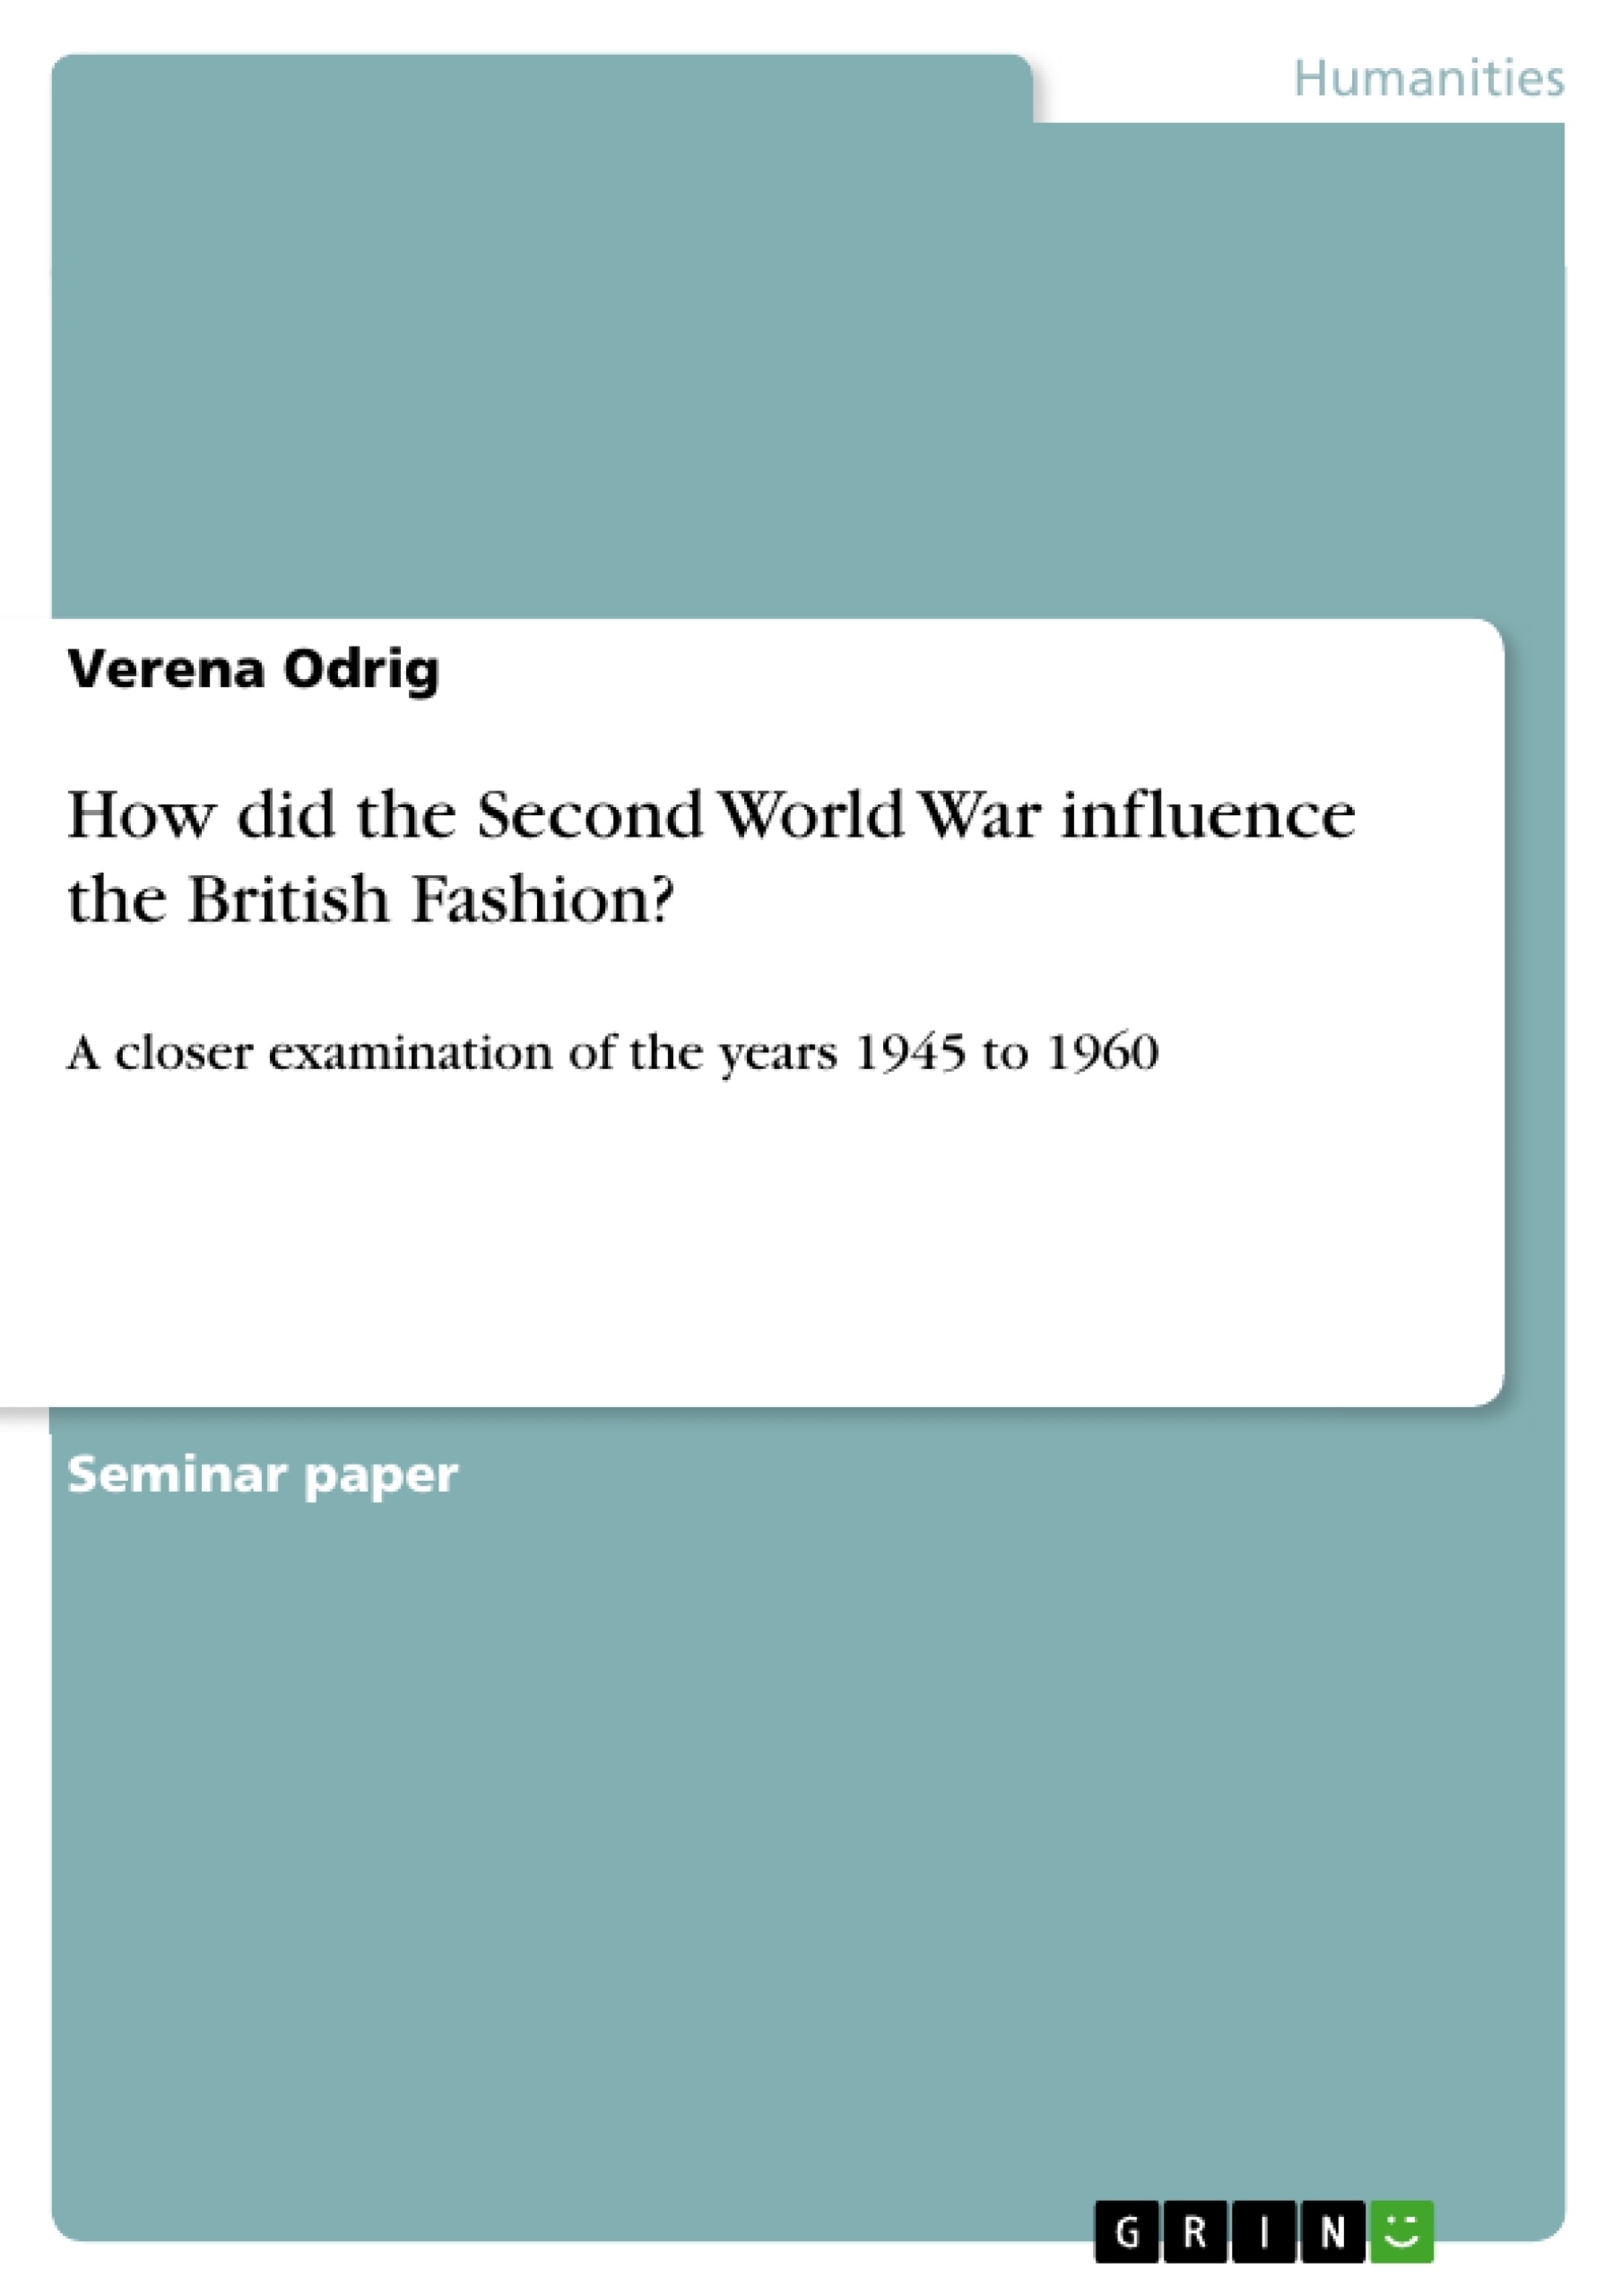 Title: How did the Second World War influence the British Fashion?